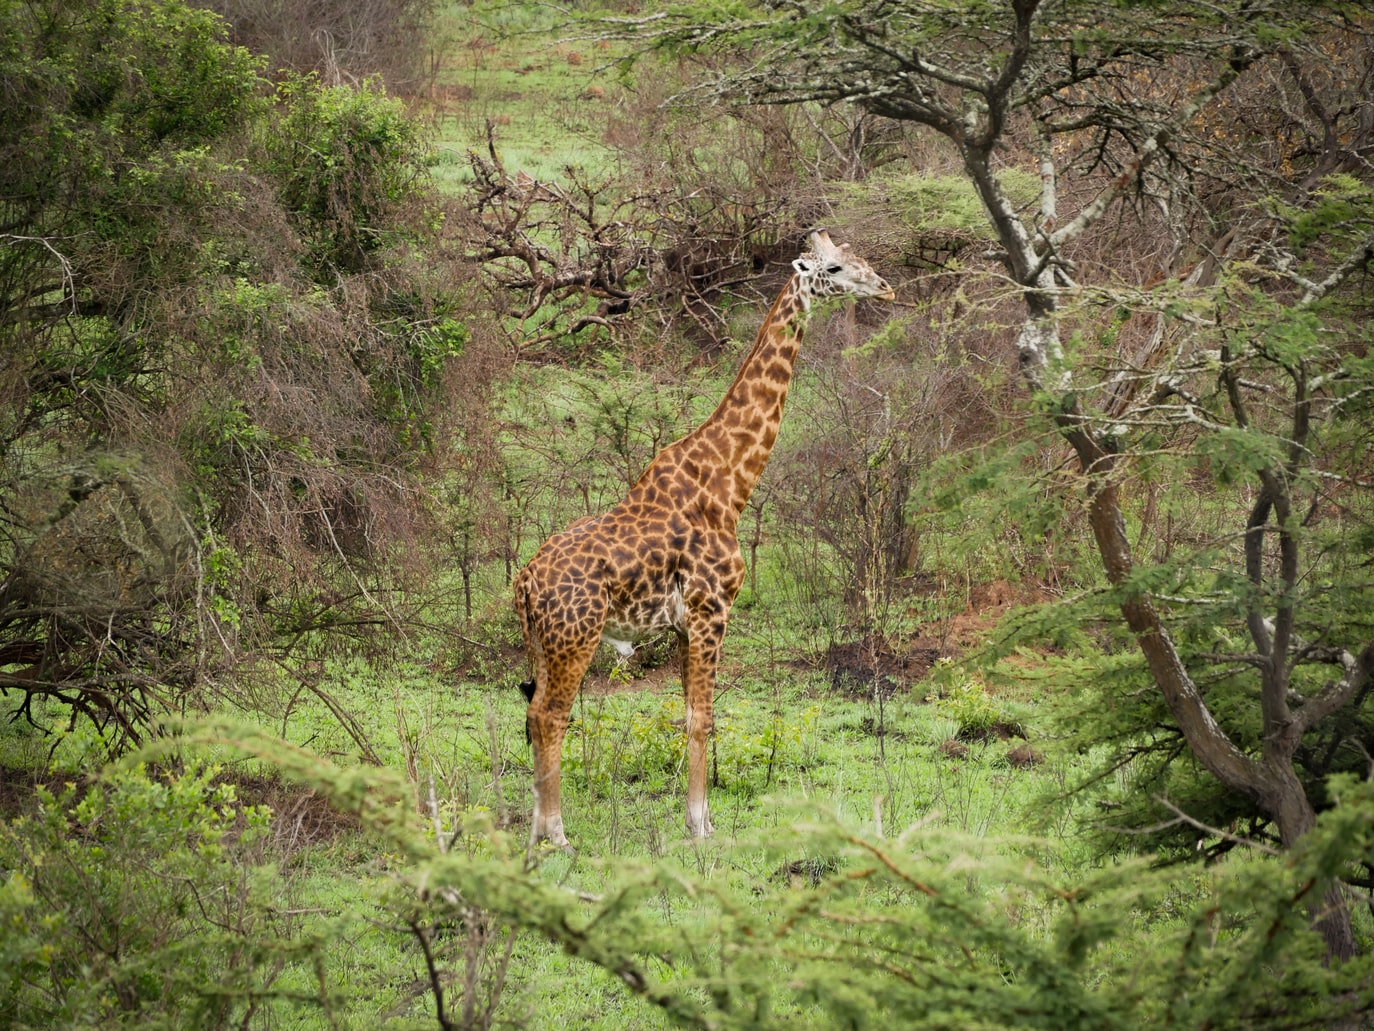 Akagera National Park yellow and brown giraffe on green grass surrounded by trees